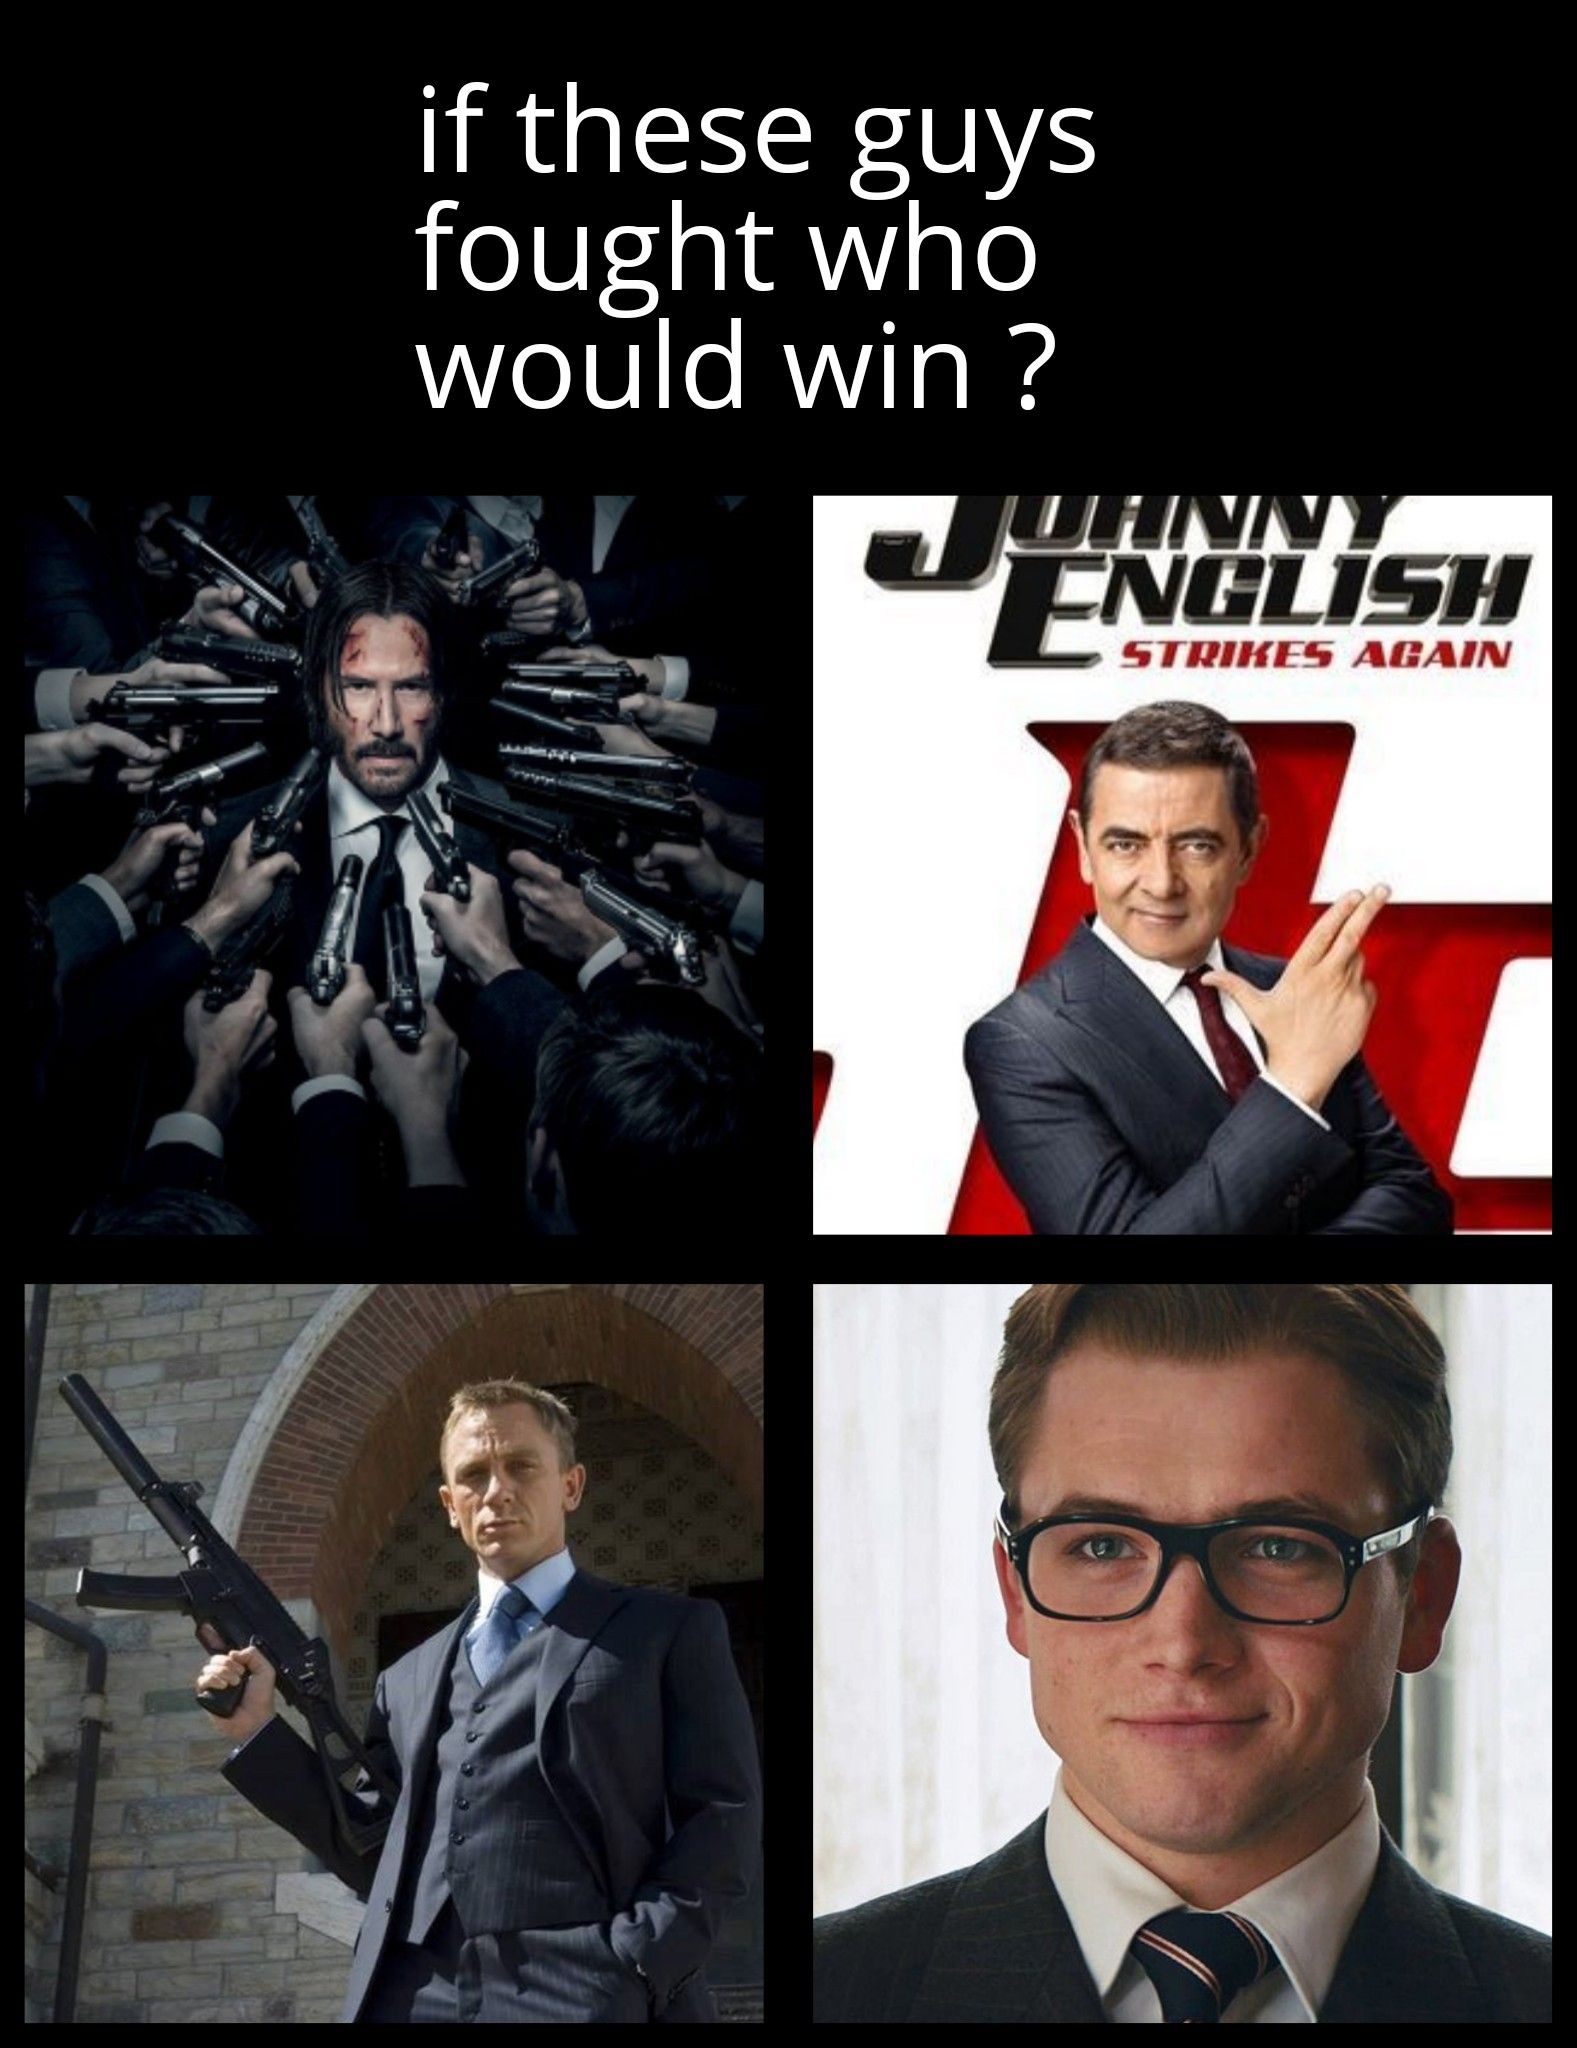 Johnny English is the winner